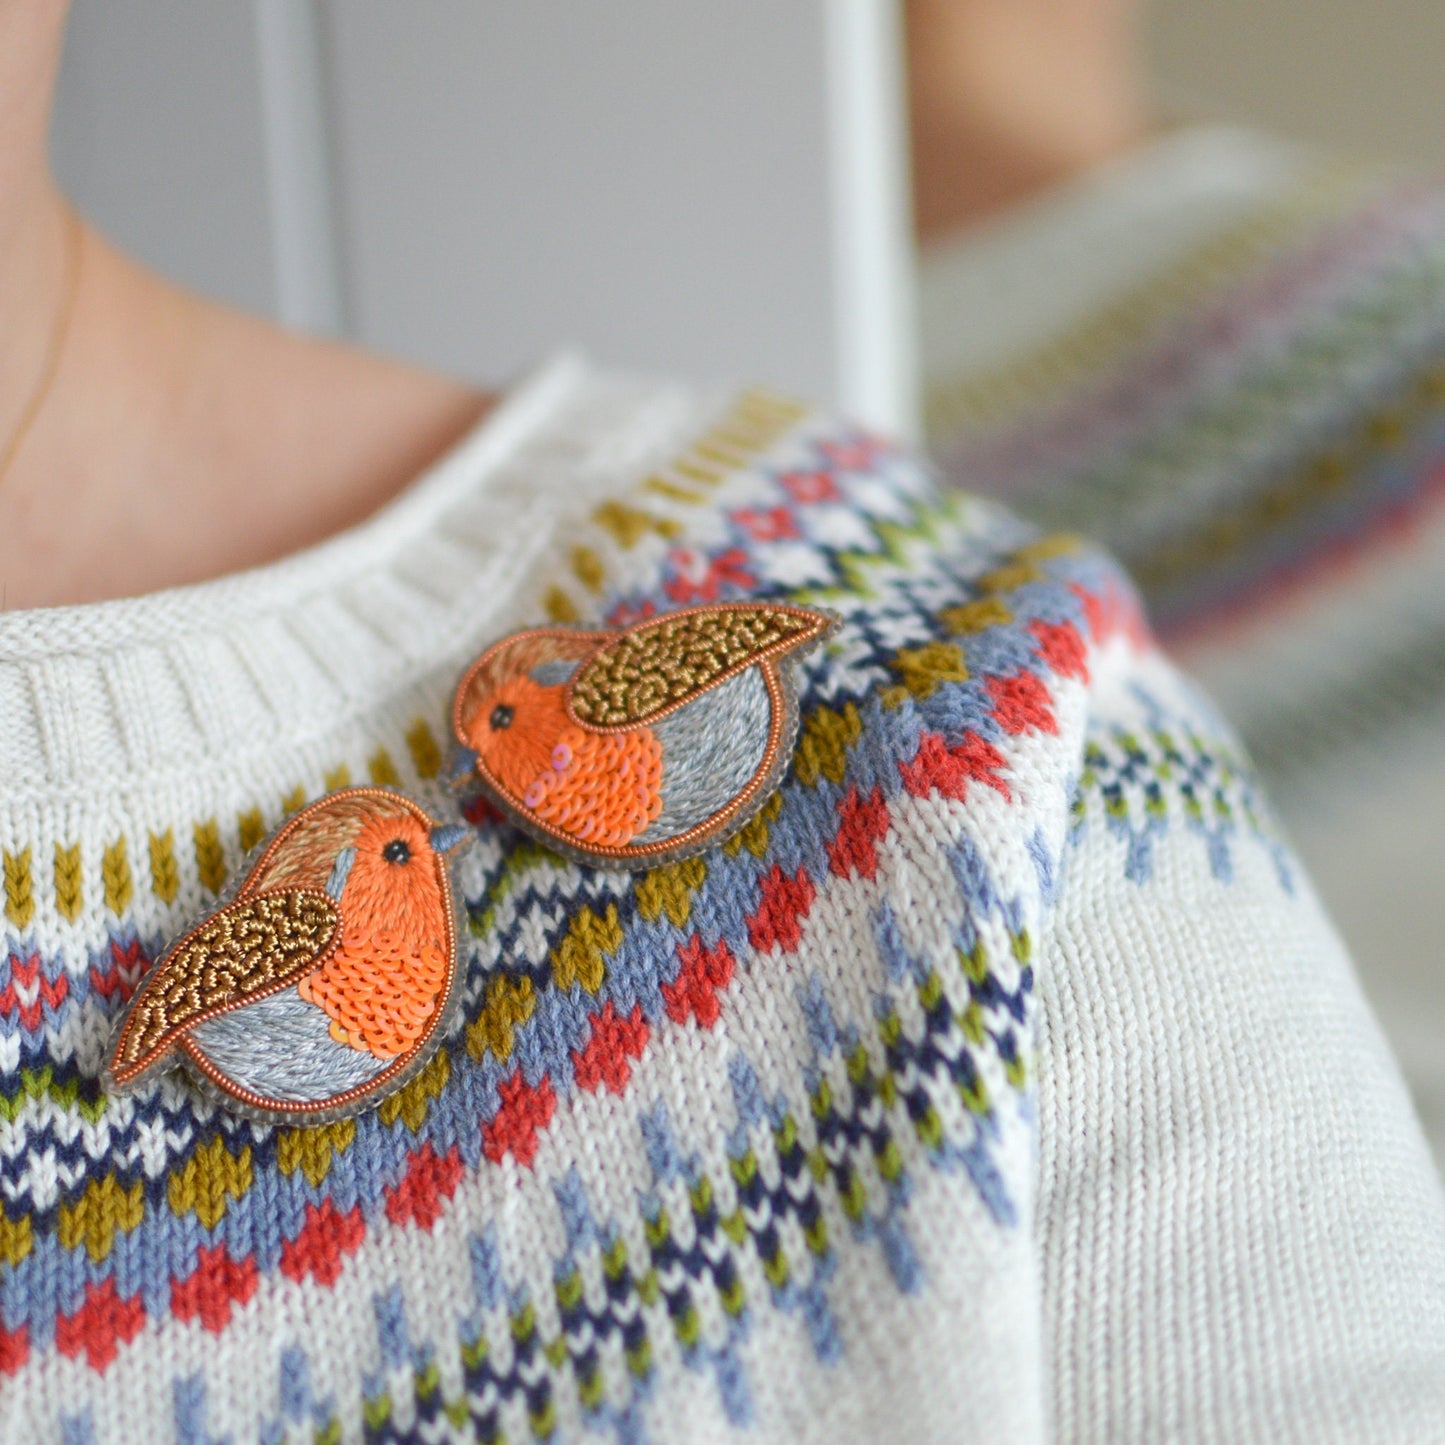 Embroidered robin brooches worn on a jumper